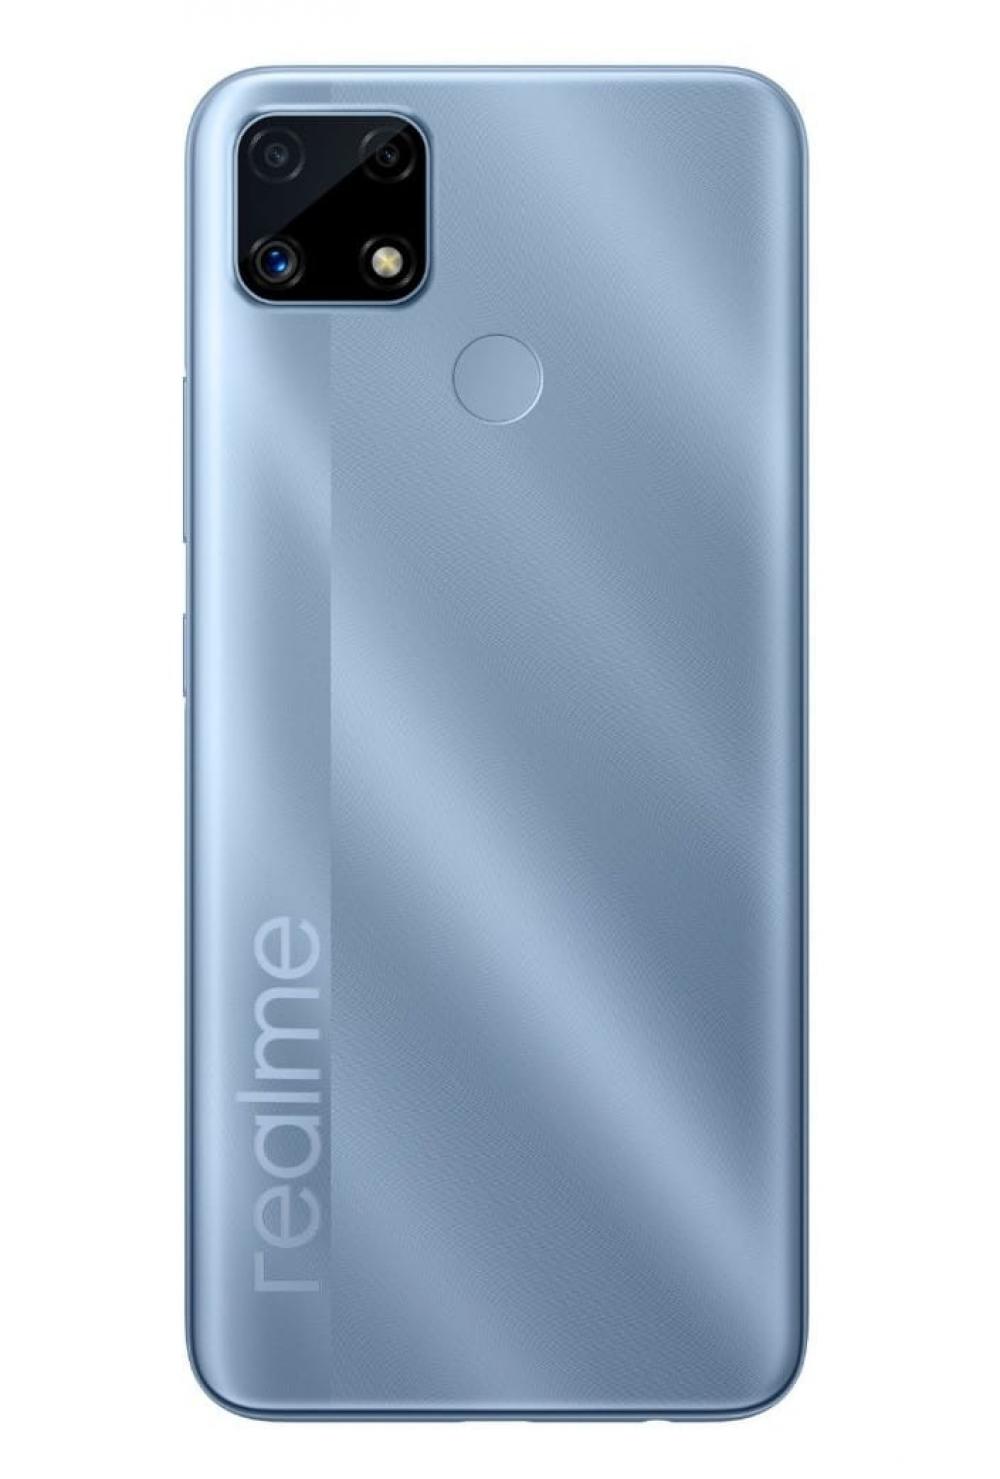 The Weekend Leader - realme to export 'make in India' smartphones to Nepal in Q3